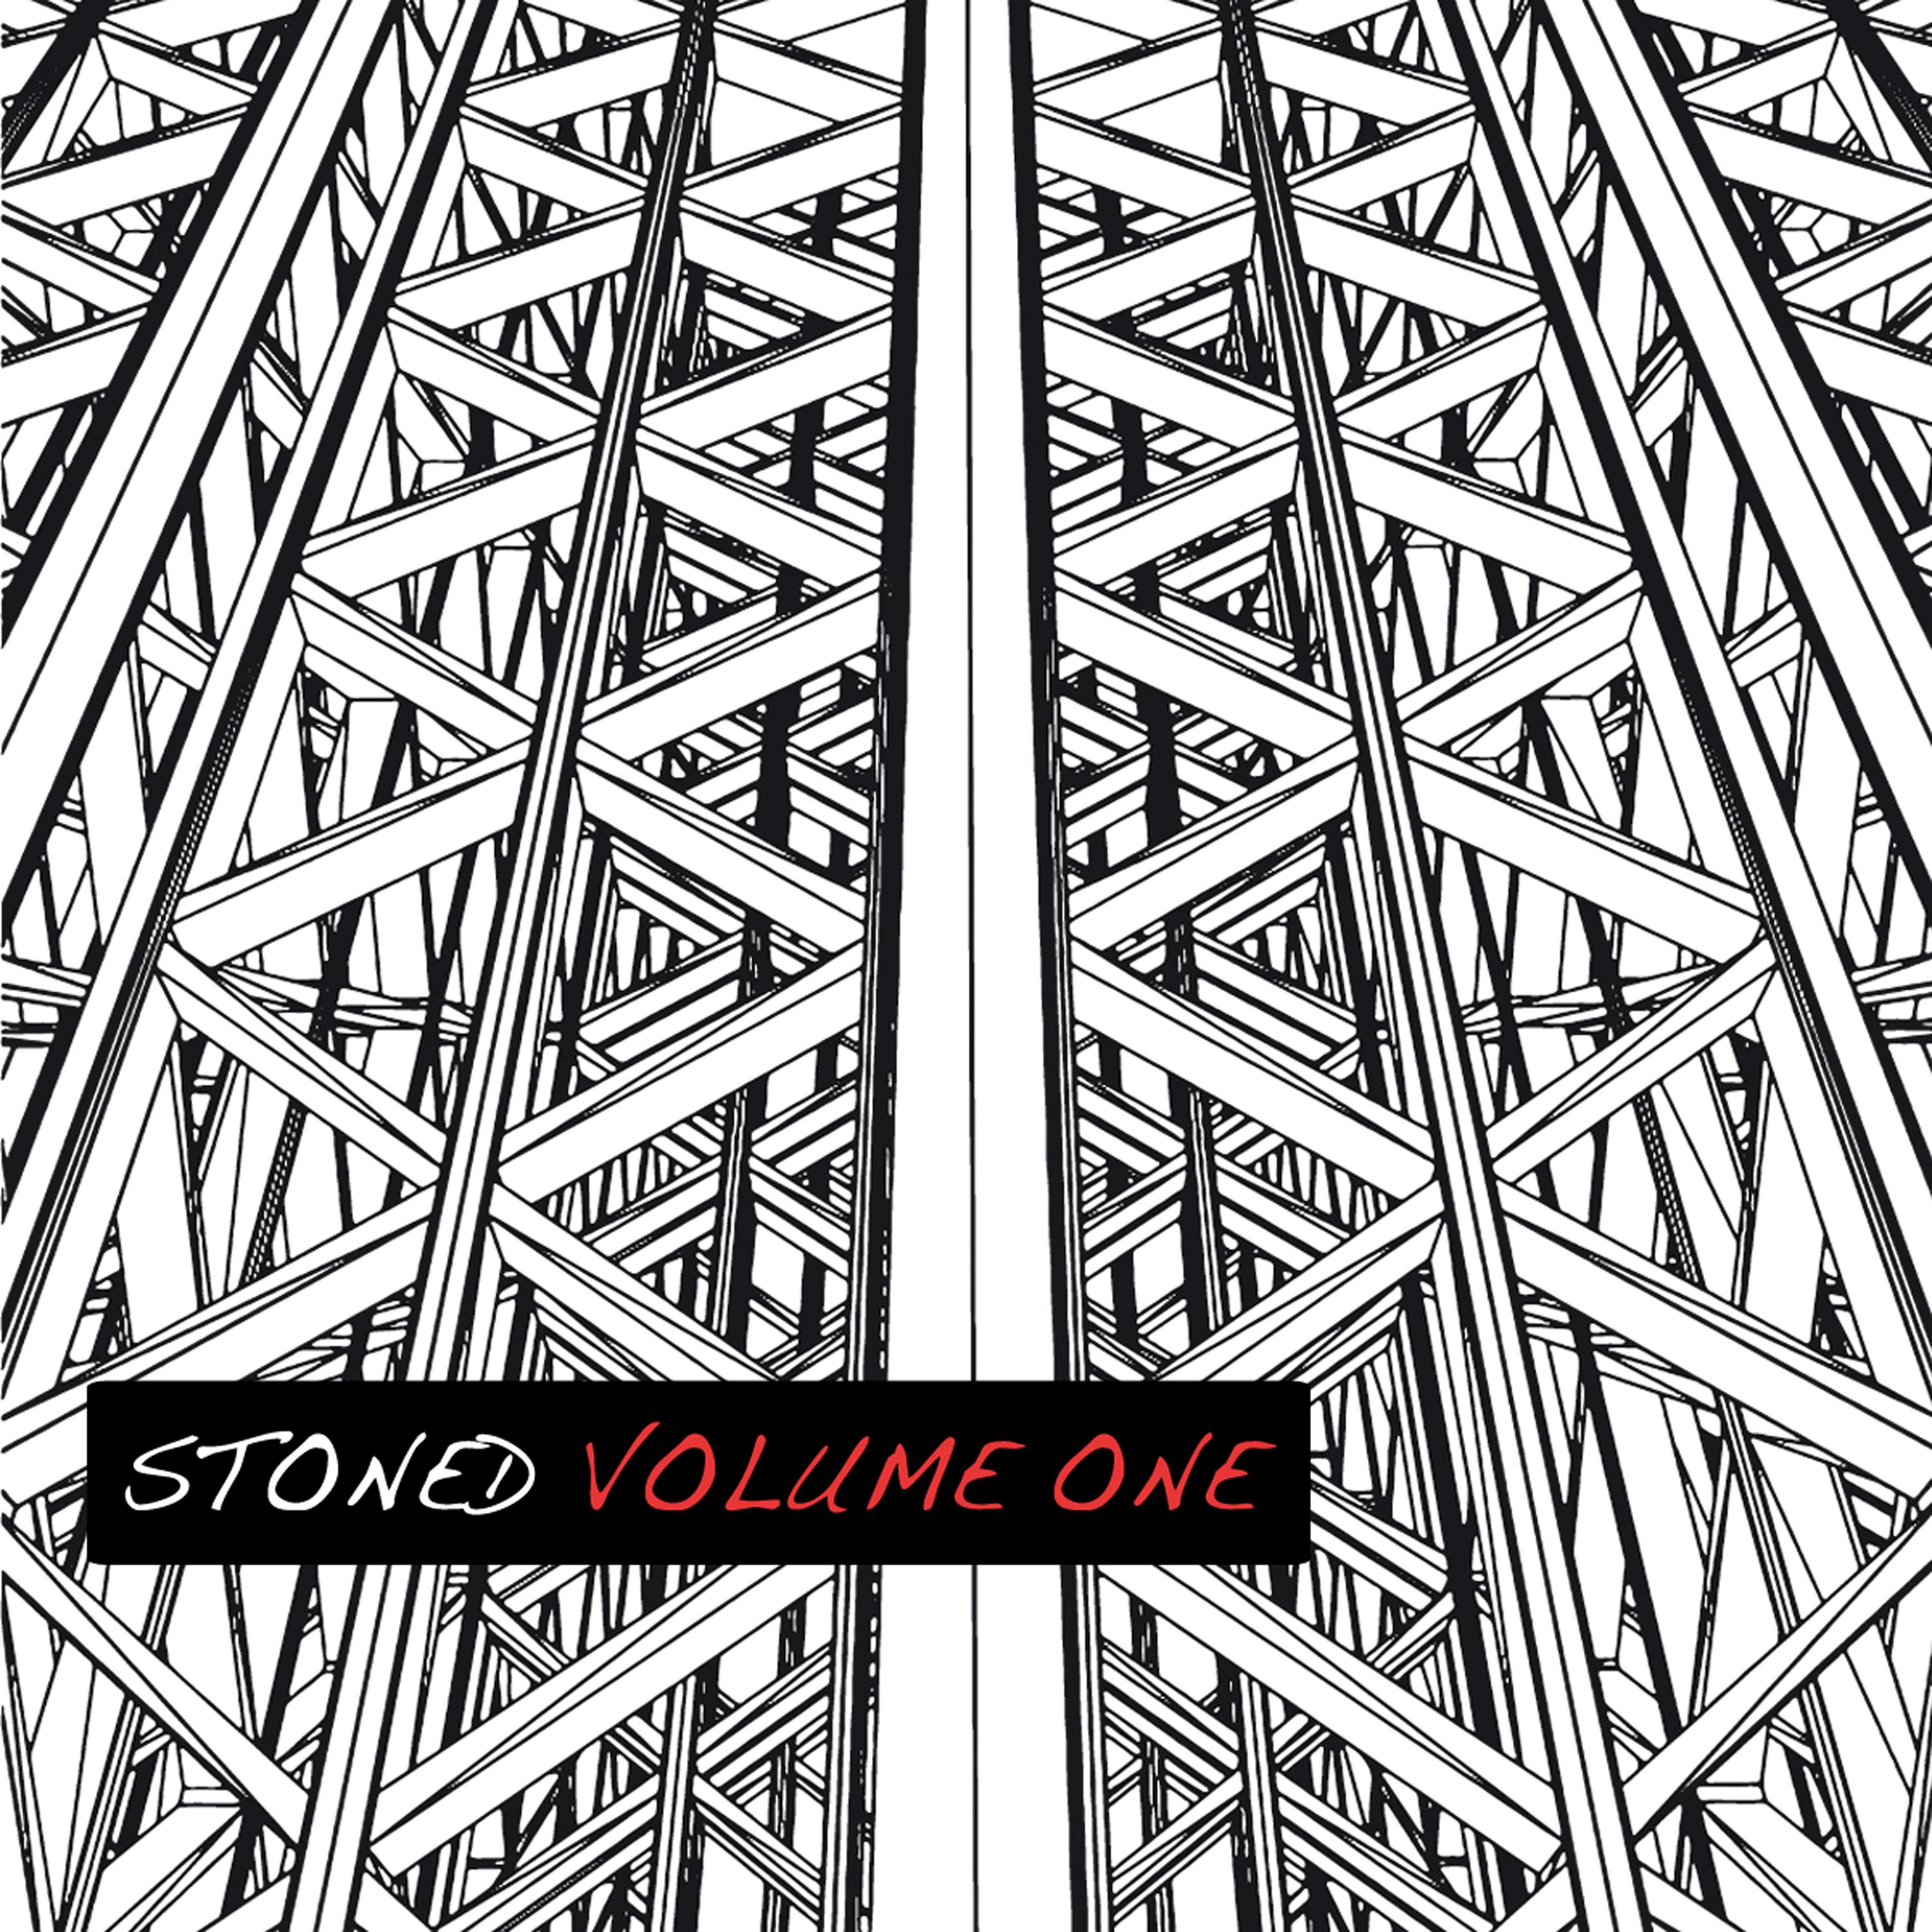 Stoned, Vol. One